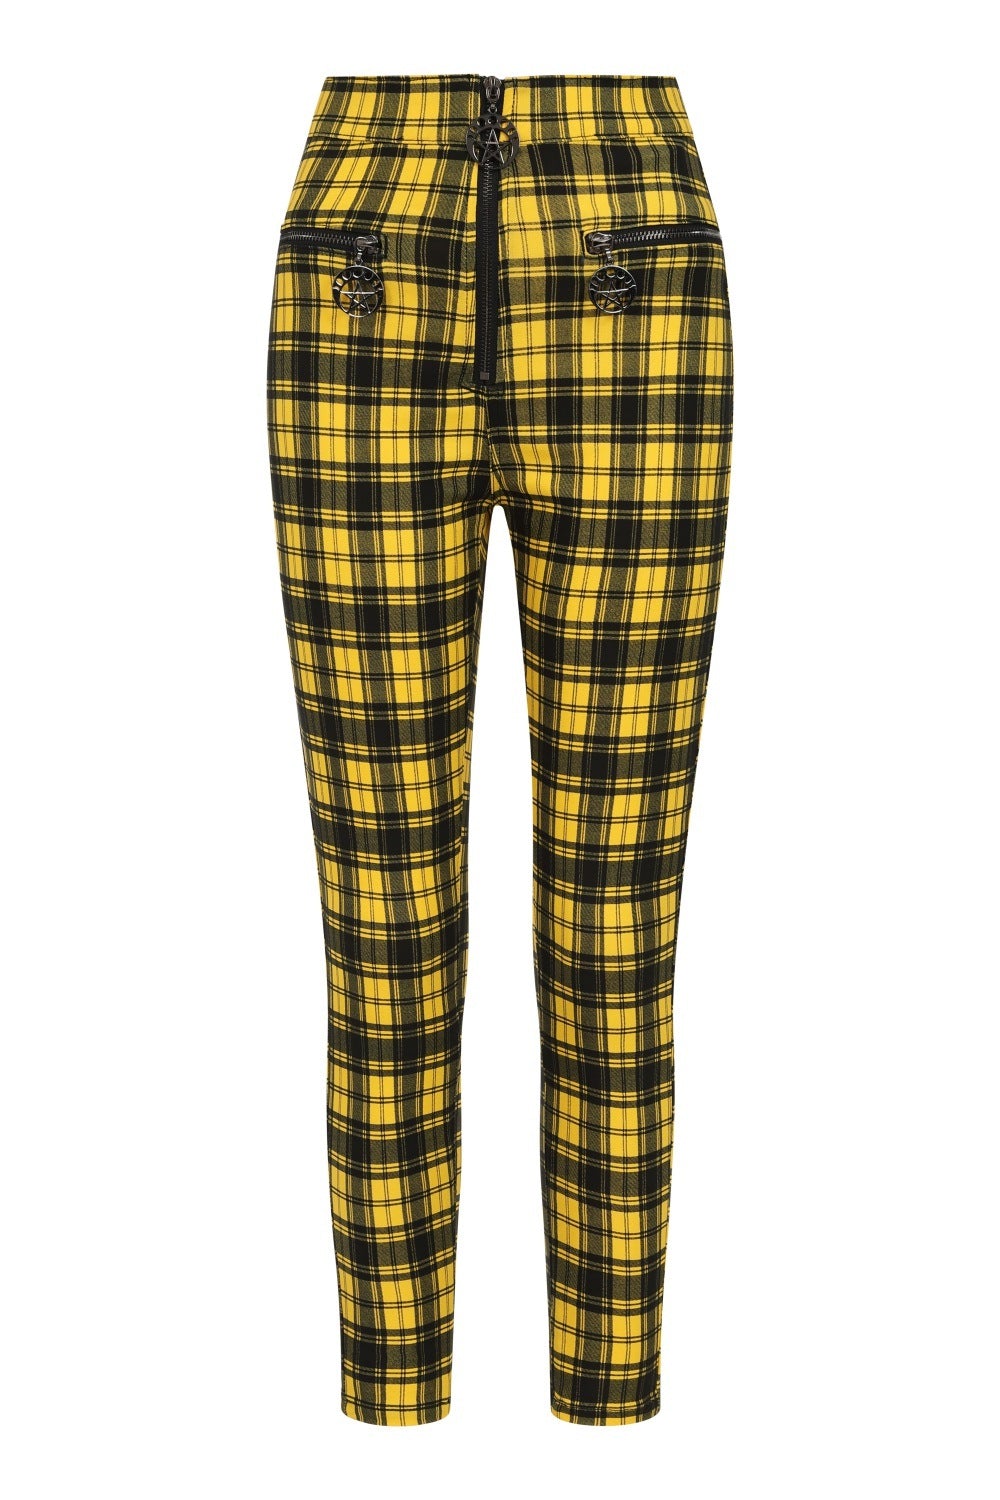 High waisted yellow check trousers with pentagram zip details. 